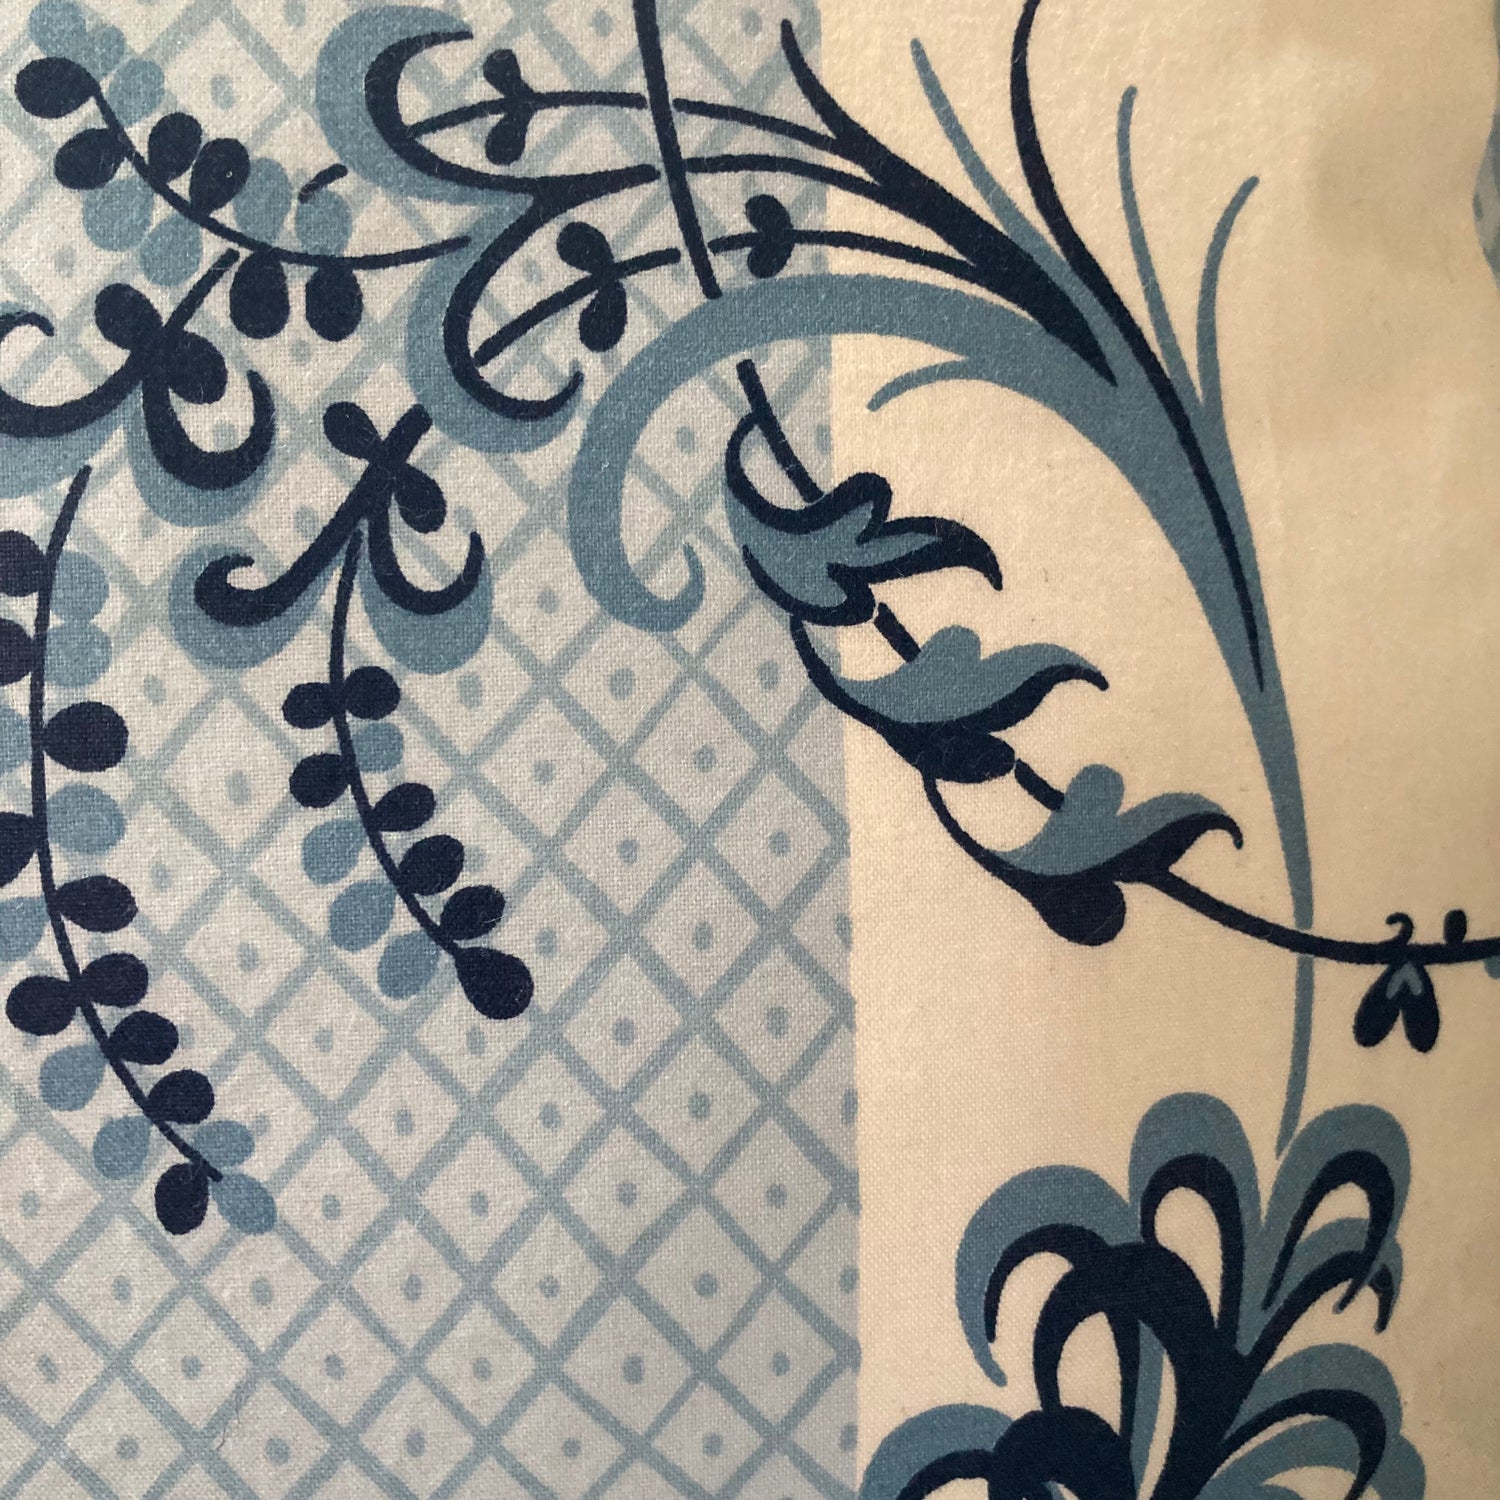 Bagatelle Pillow Detail Serene Blue and White Trellis and Vine Stripe Decorative Toss Pillow 15 X 15 Square with Down Feather Insert